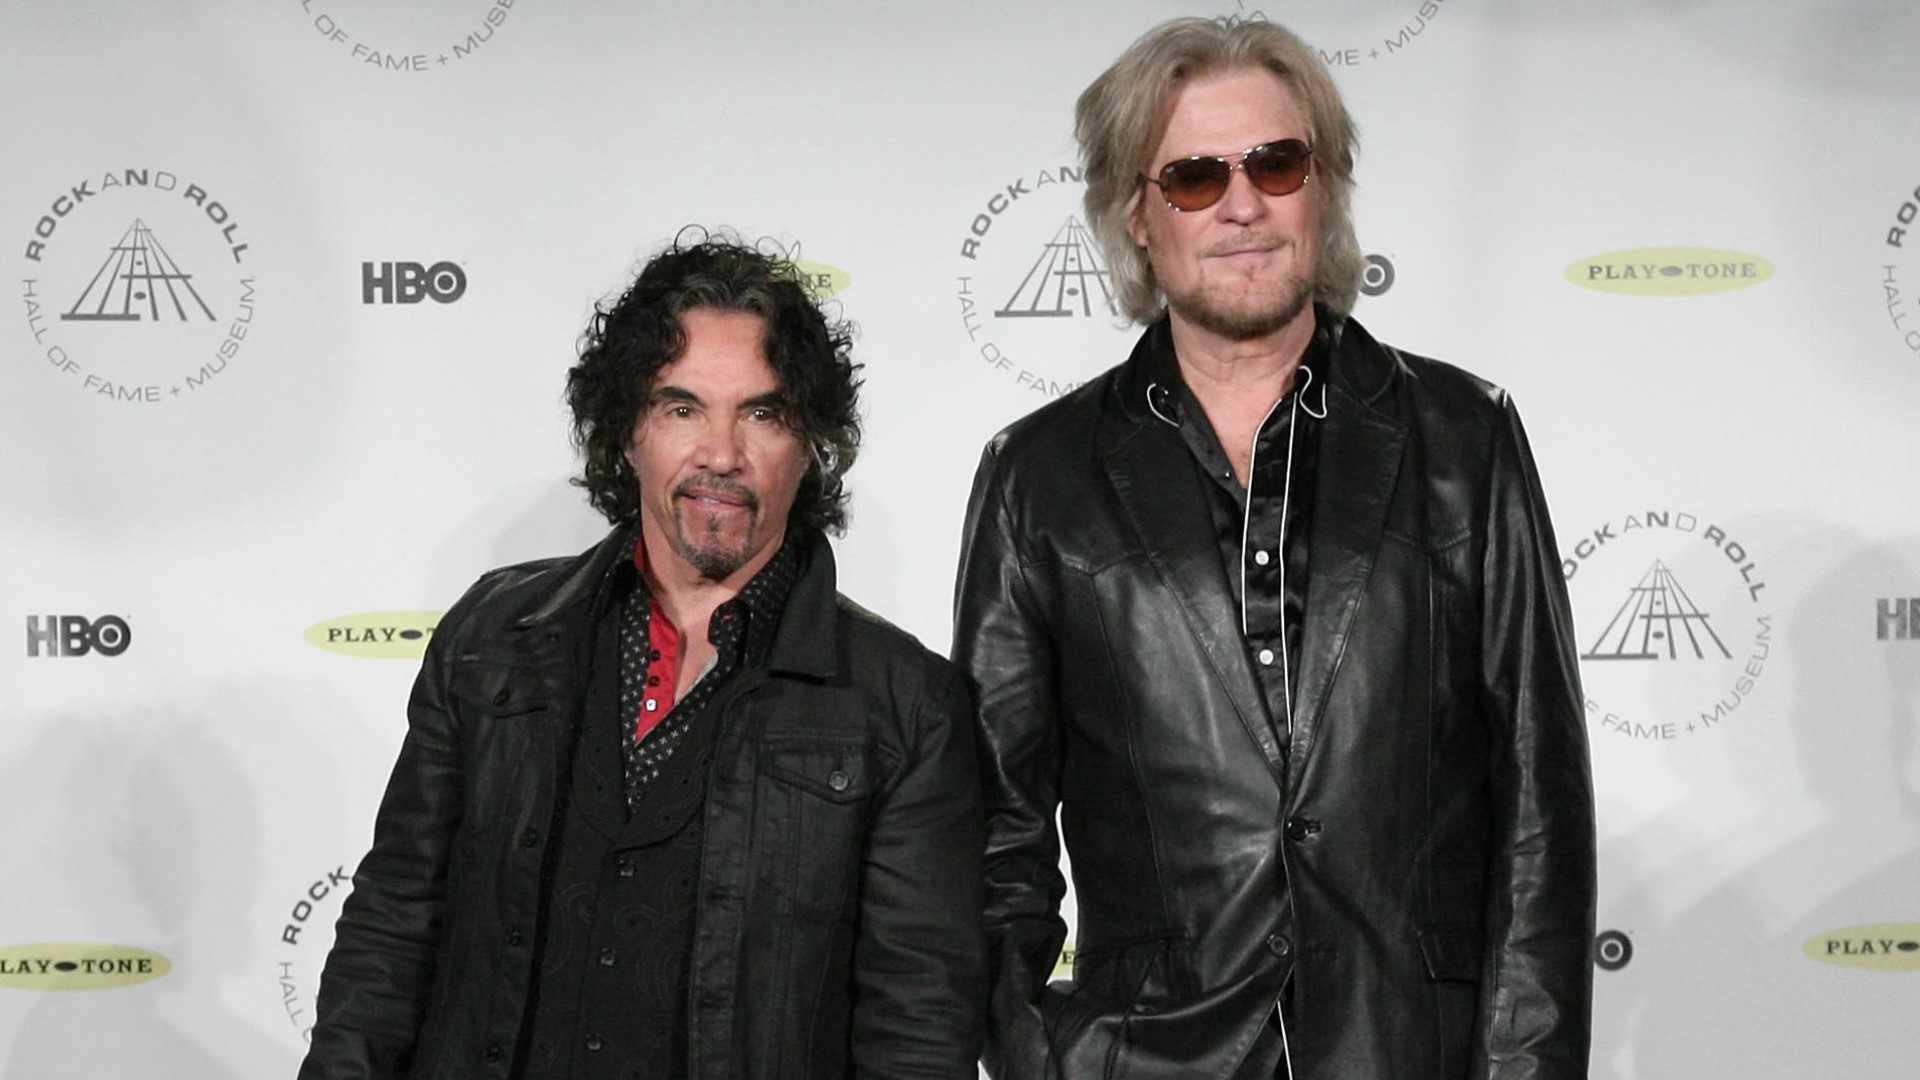 This virtual concert features both Hall and Oates, but not 'Hall